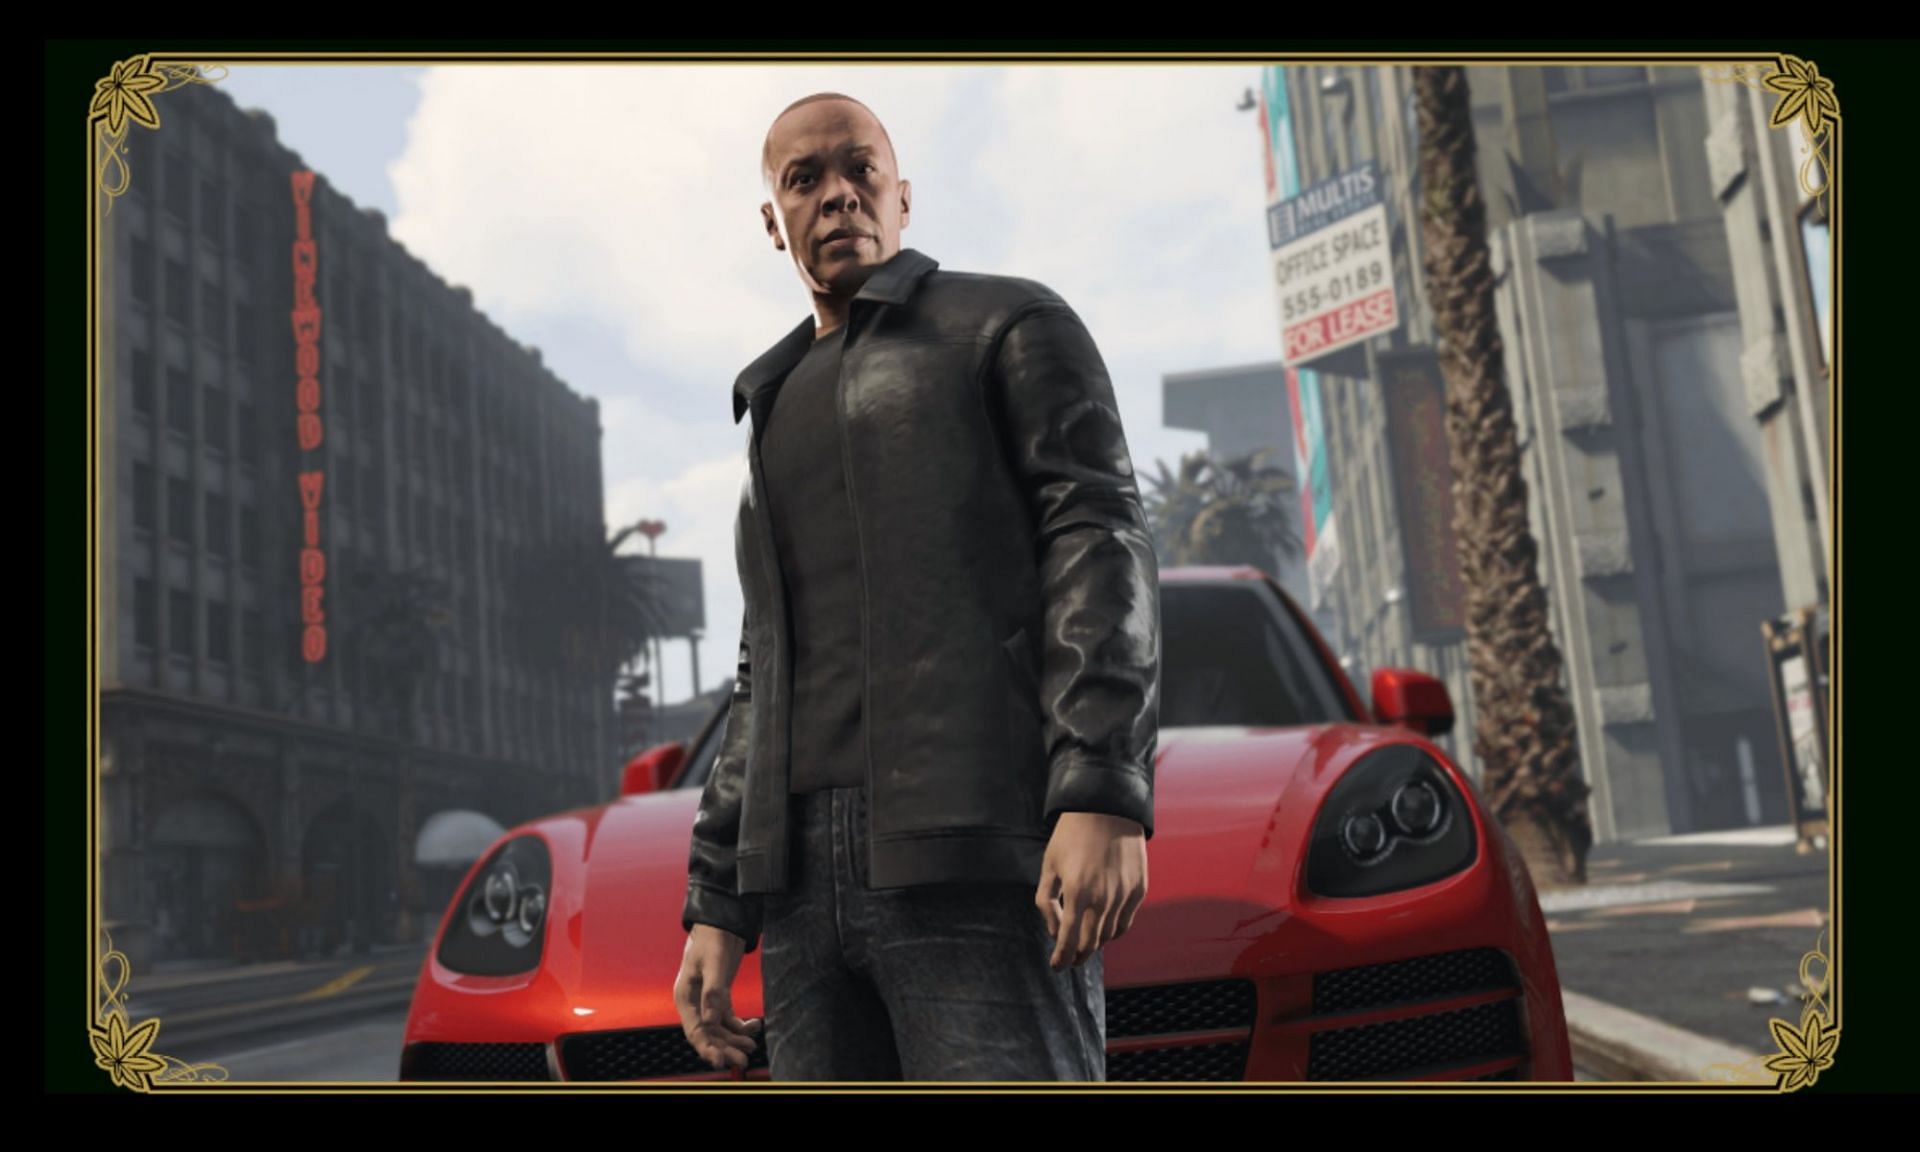 The controversial rap artist is set to play a major role in GTA Online (Image via Rockstar Games)